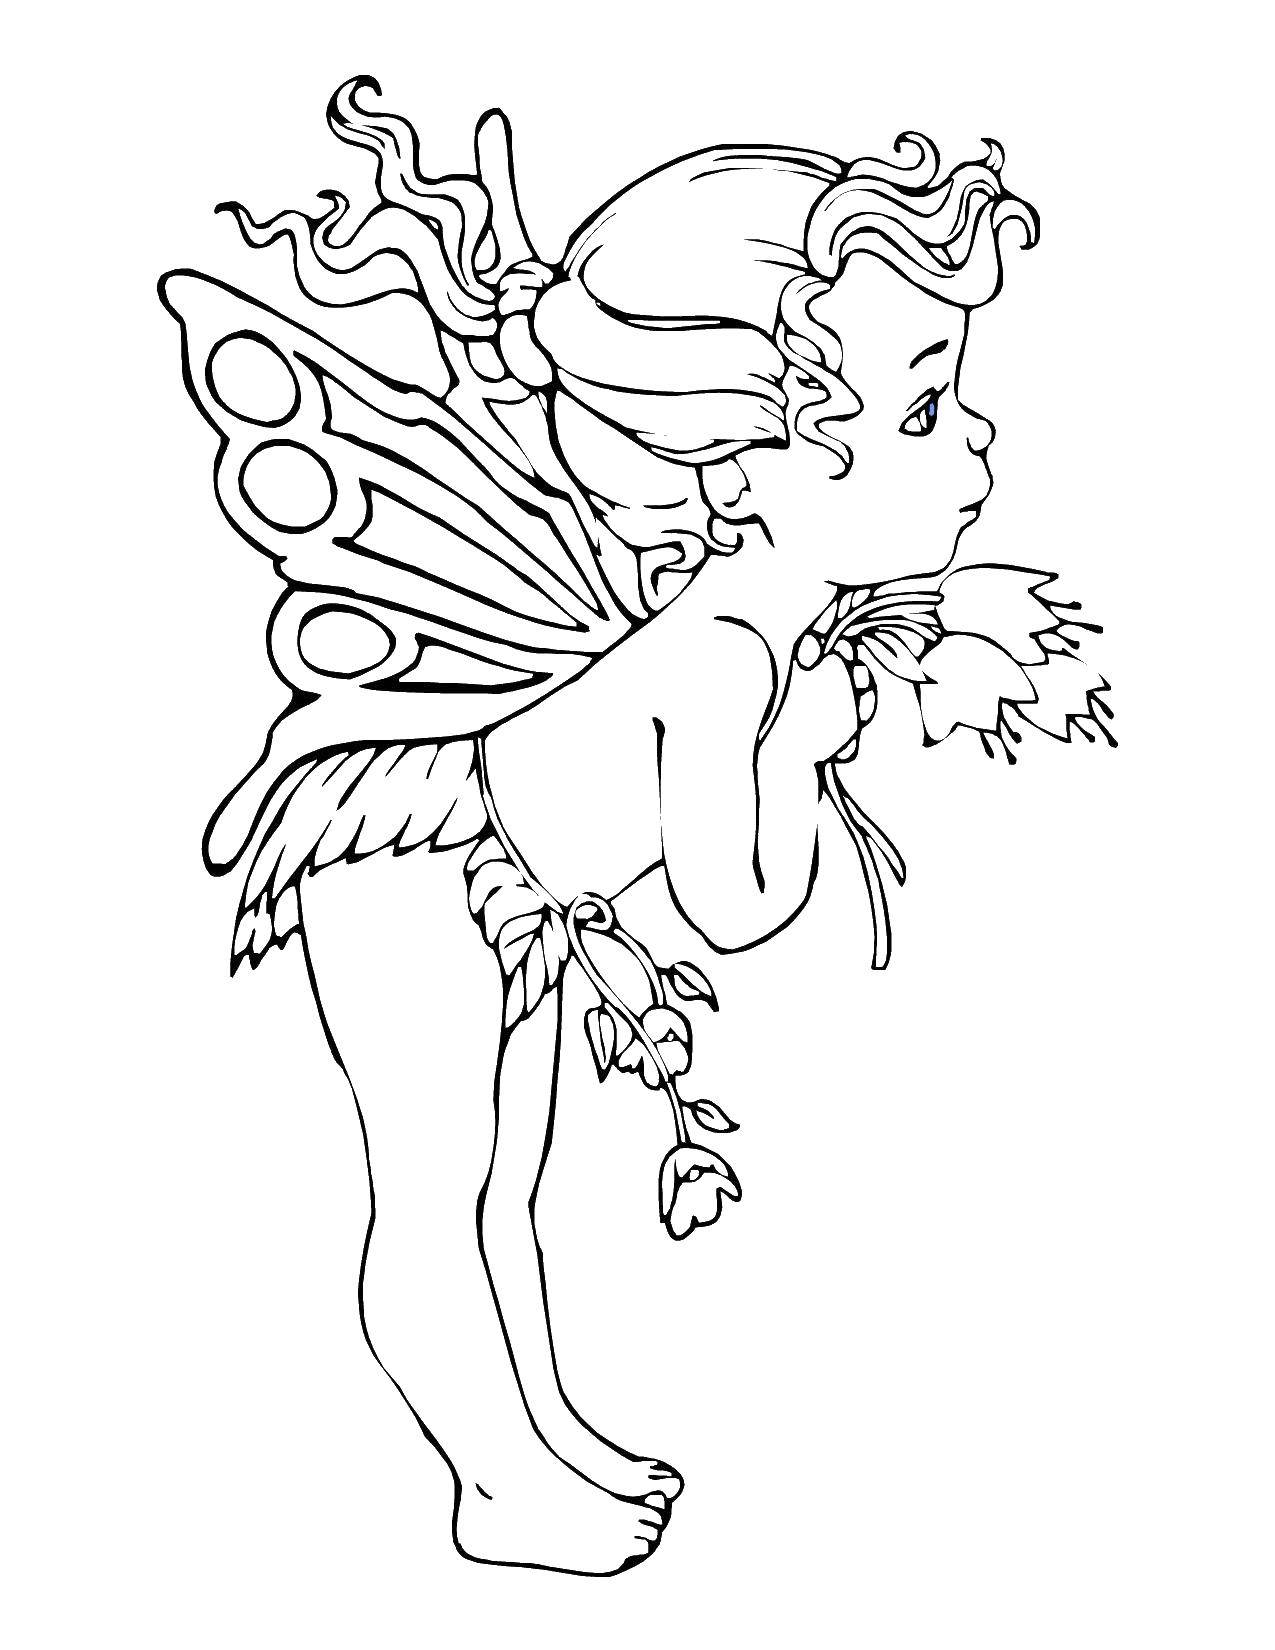 Coloring Fairy girl. Category Fantasy. Tags:  fantasy, girl, children.